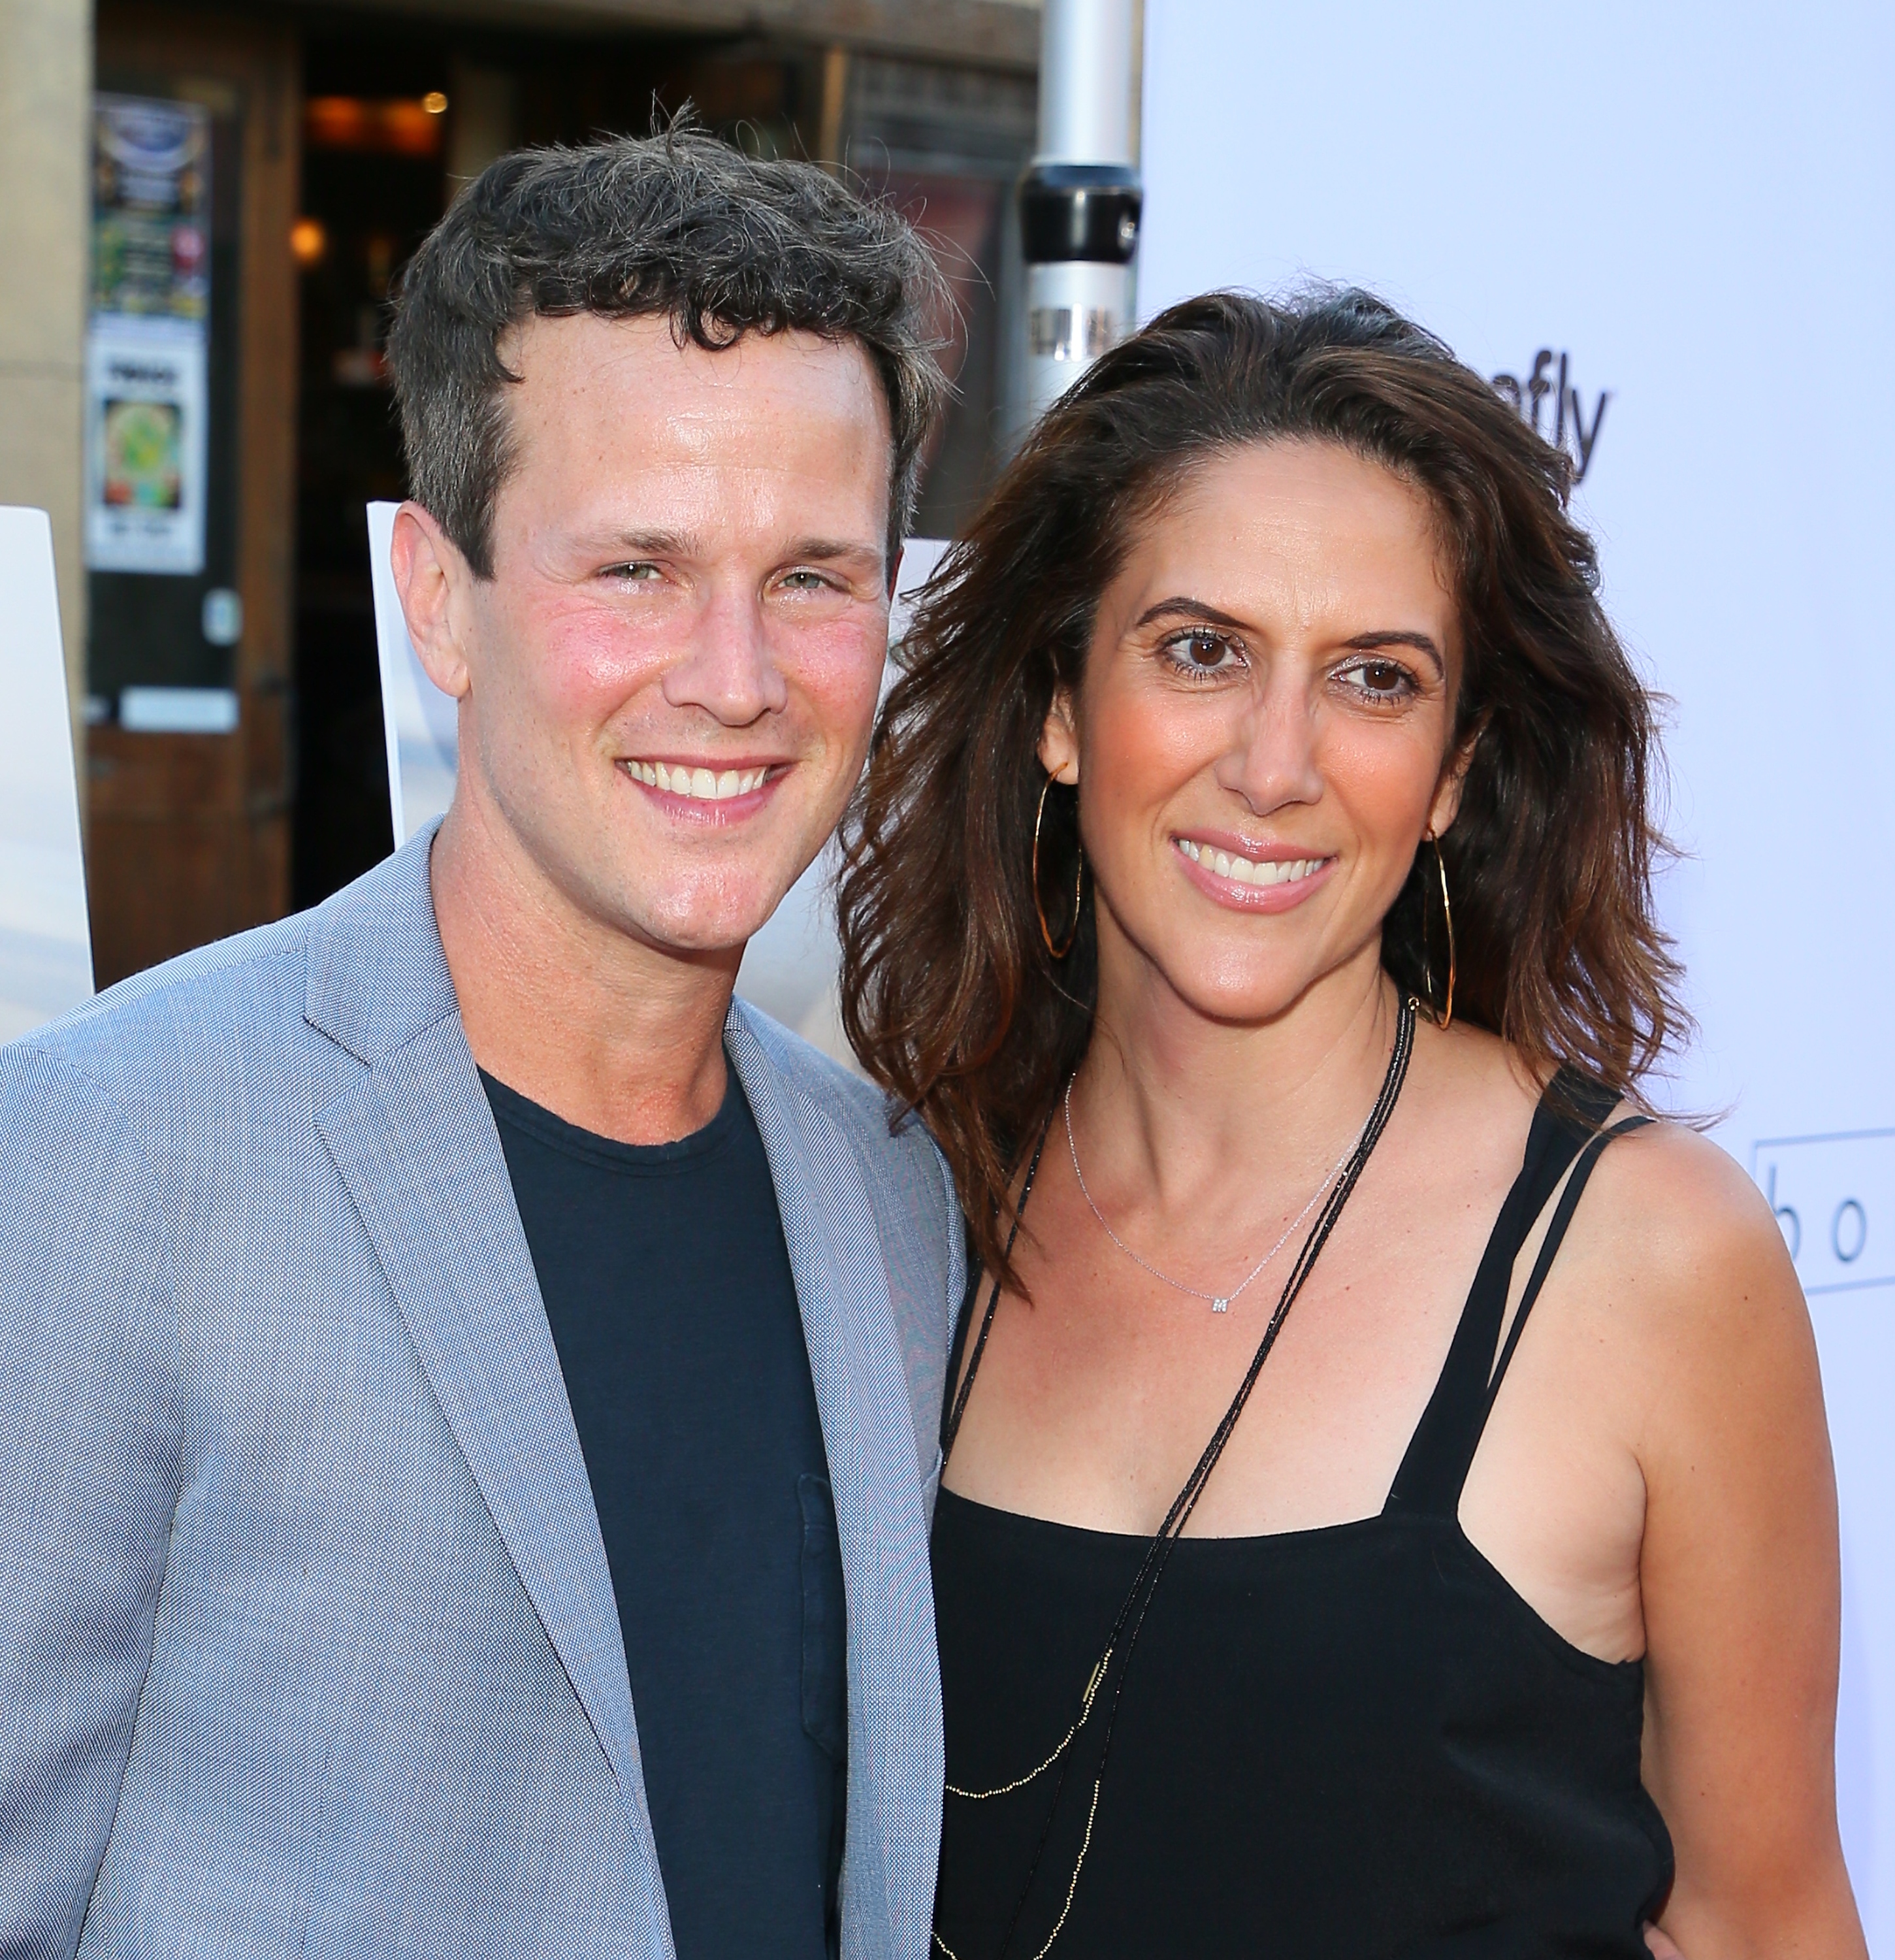 Scott Weinger and Rina Mimoun at the premiere of "Boundaries" on June 19, 2018 in Hollywood, California. | Source: Getty Images